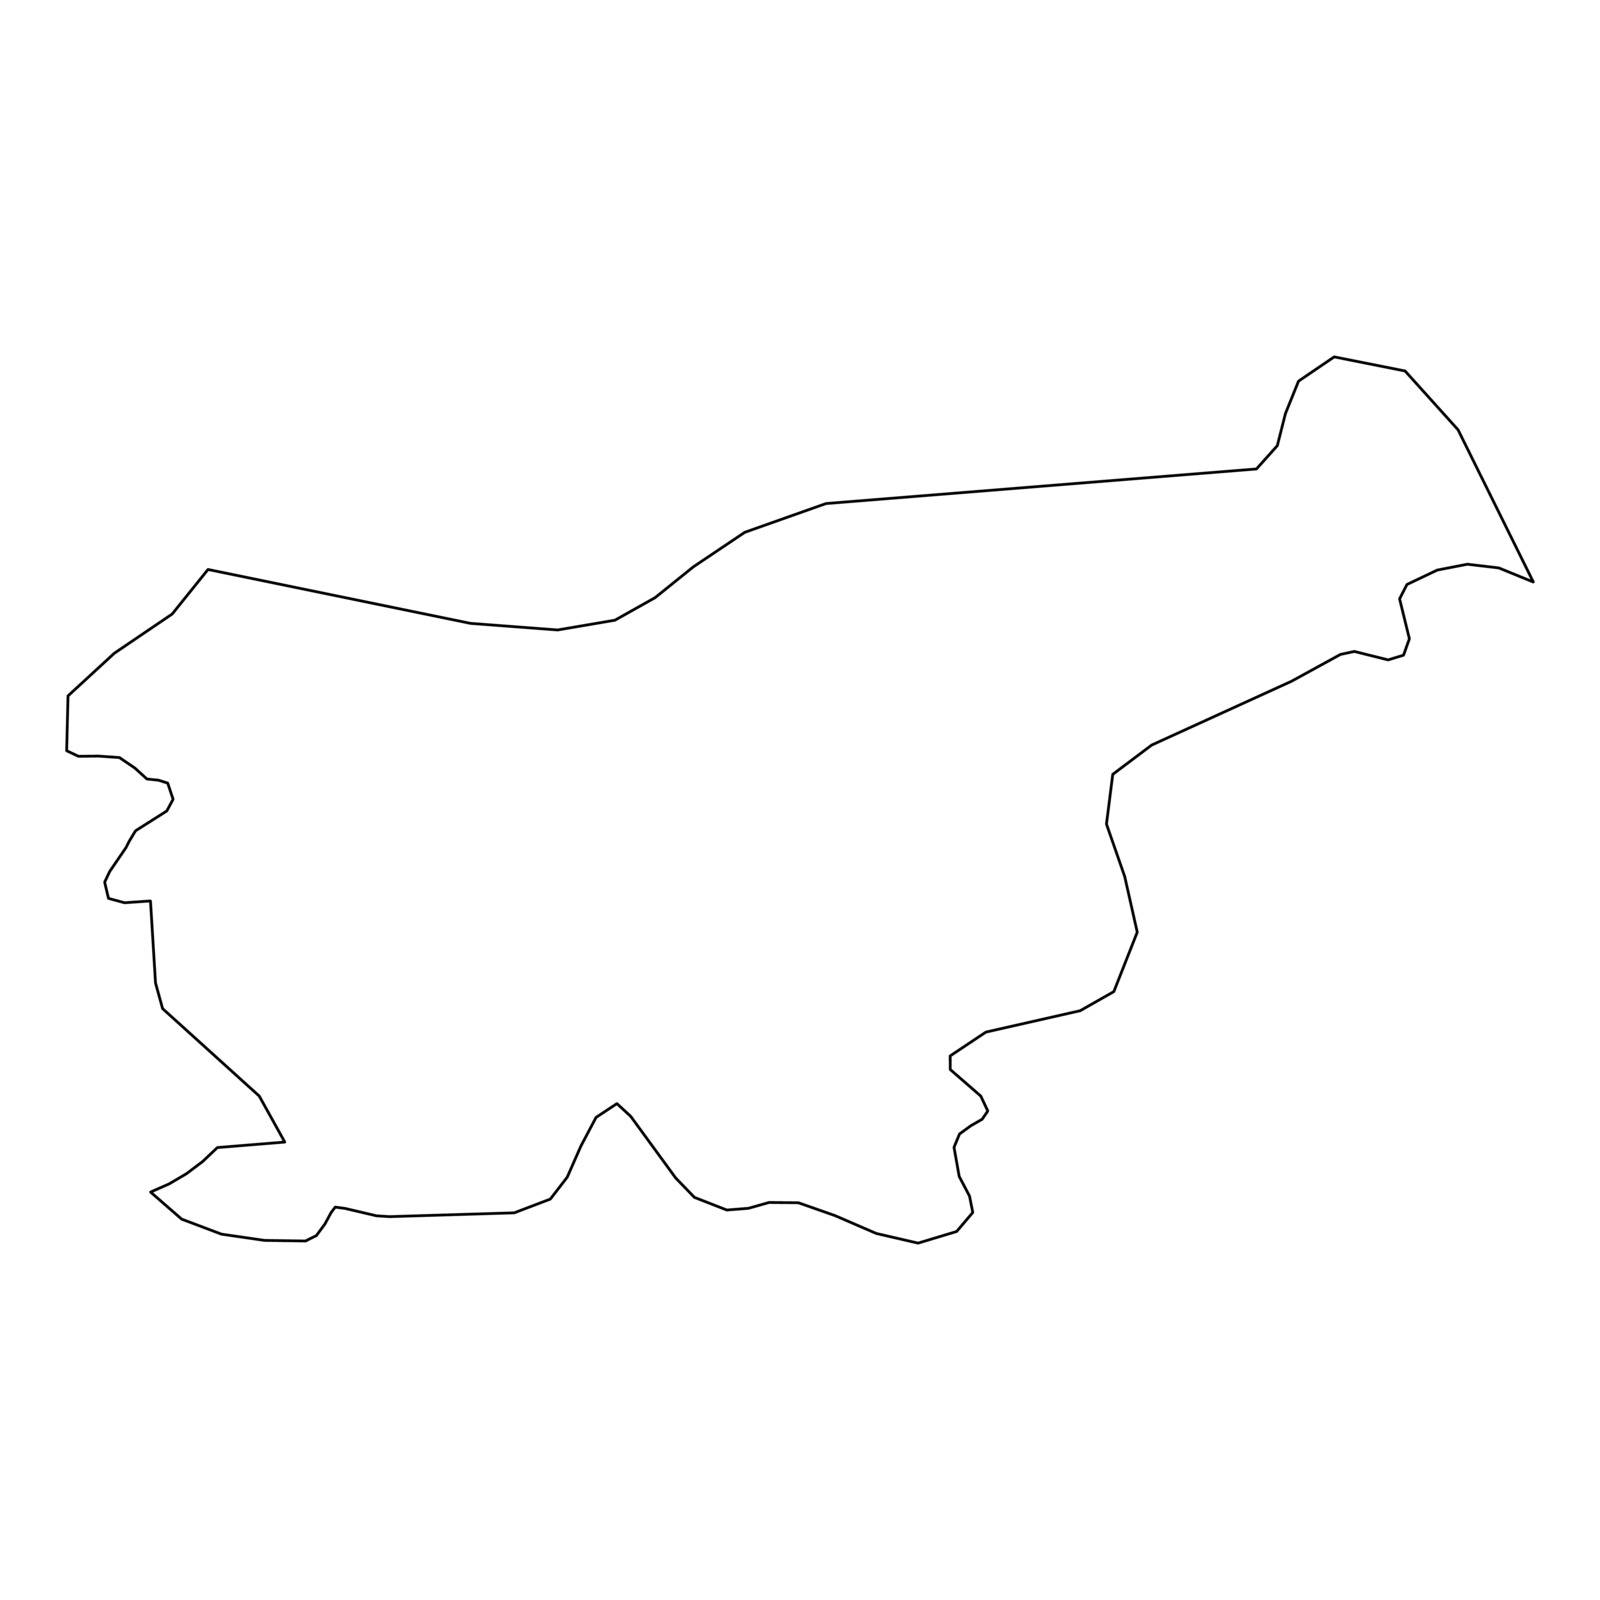 Slovenia - solid black outline border map of country area. Simple flat vector illustration.